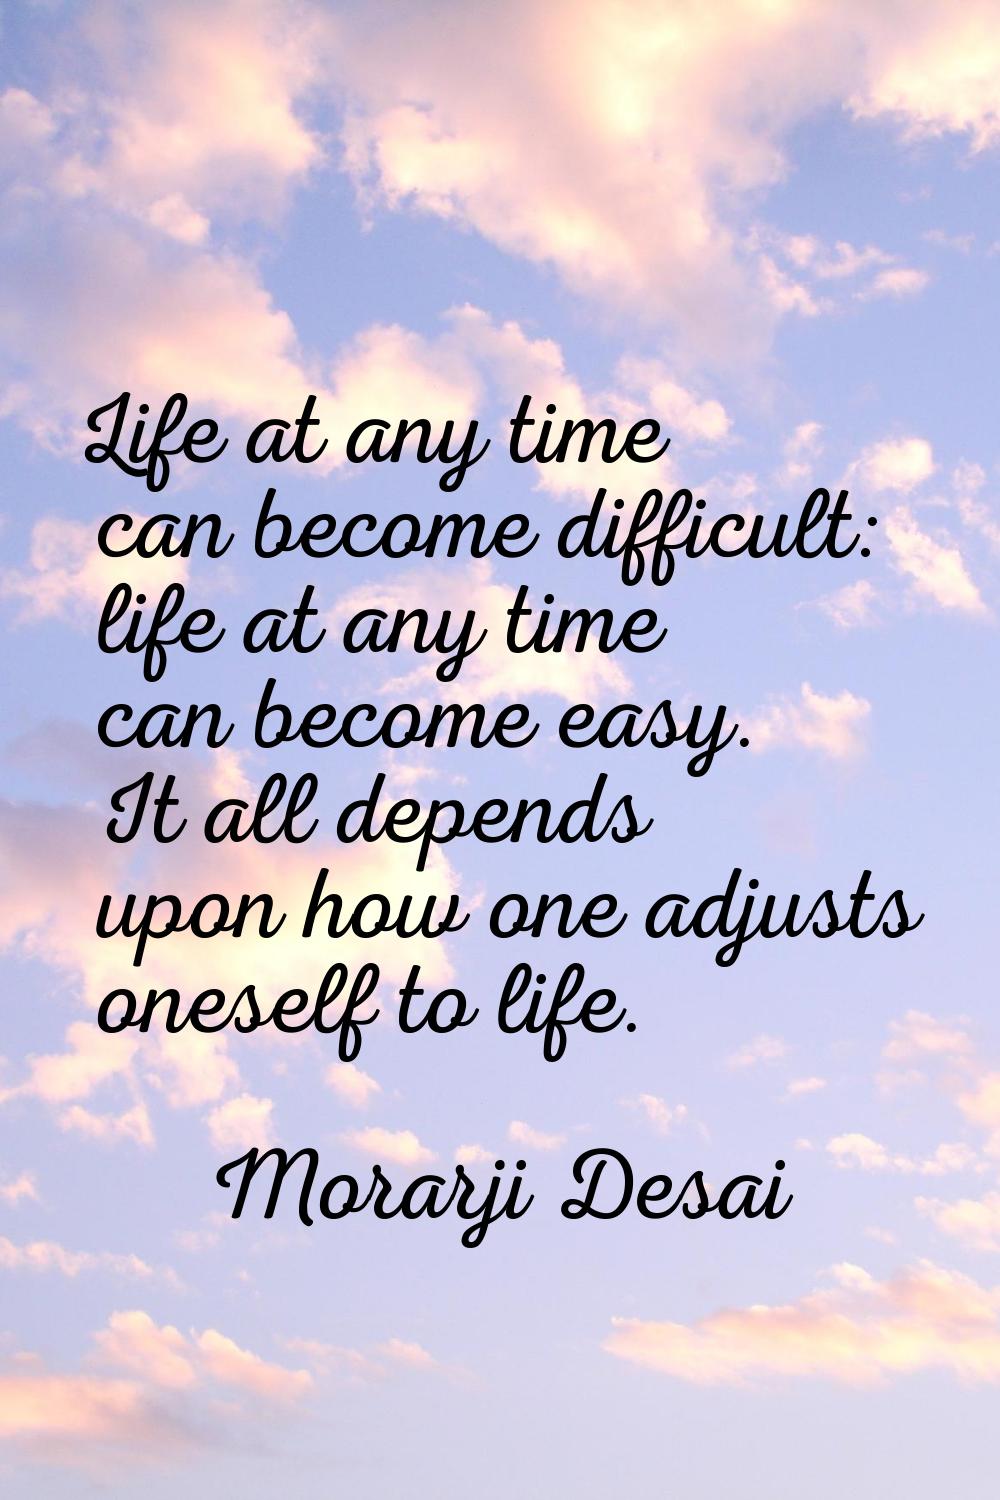 Life at any time can become difficult: life at any time can become easy. It all depends upon how on